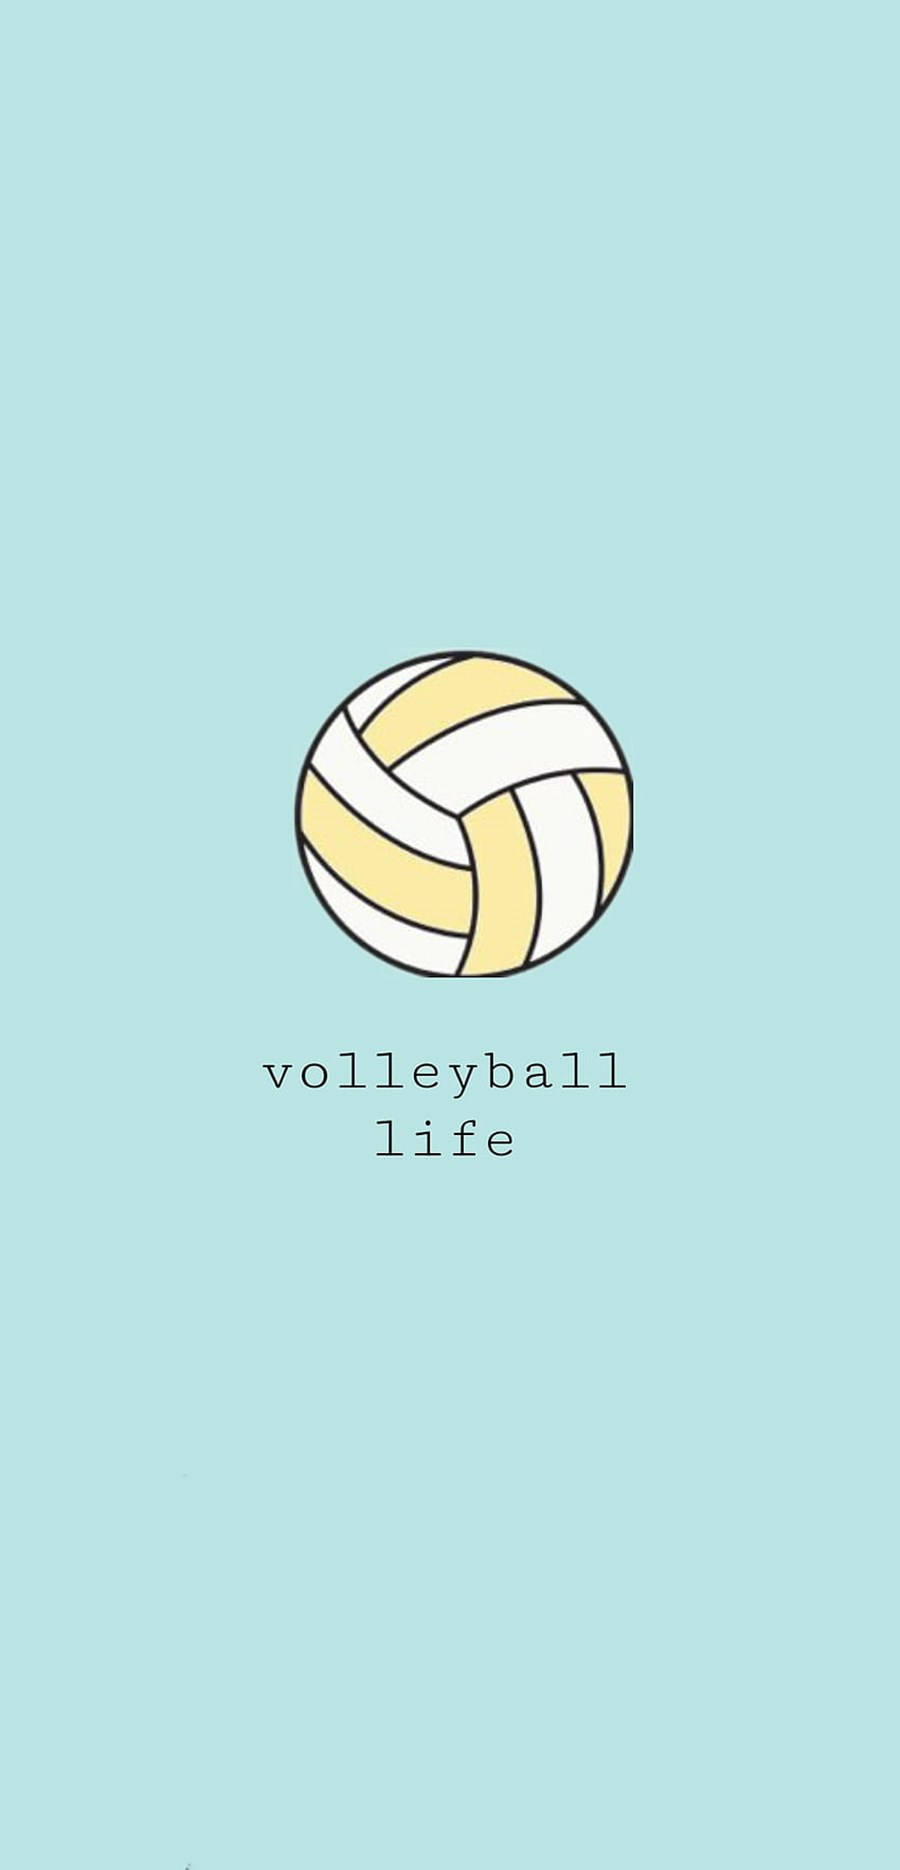 Download Embracing the Volleyball Aesthetic Wallpaper | Wallpapers.com